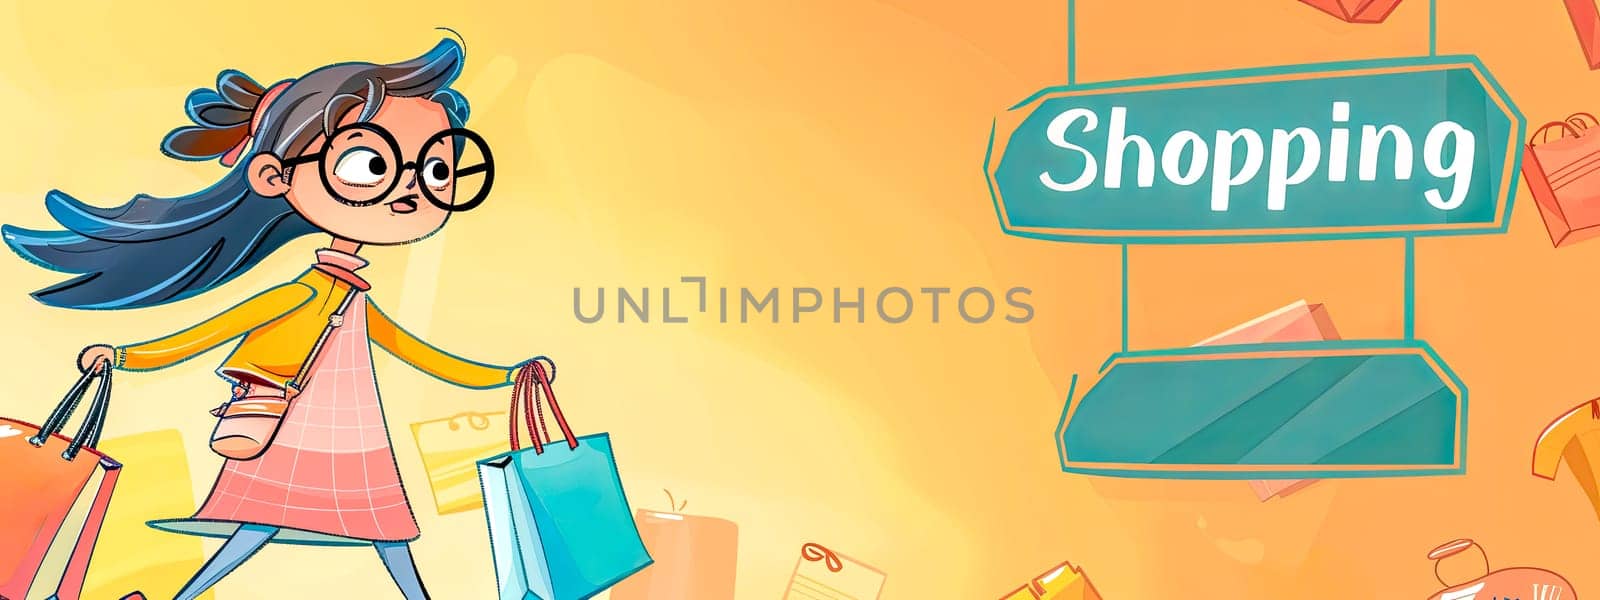 Illustration of a happy young woman laden with shopping bags on a vibrant background